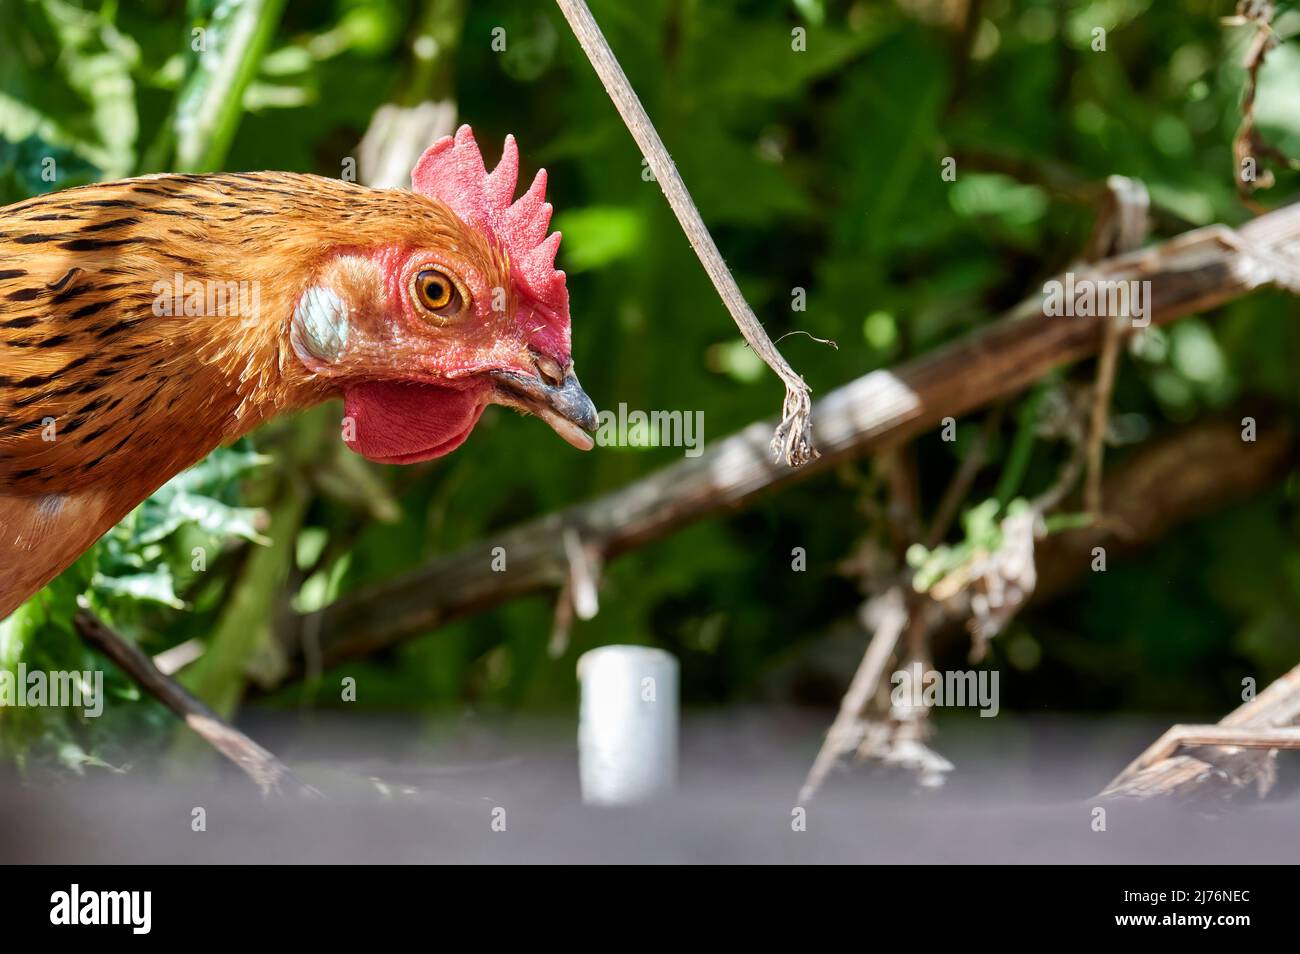 Close up of the head of a hen with orange and black fur and a nice red comb Stock Photo